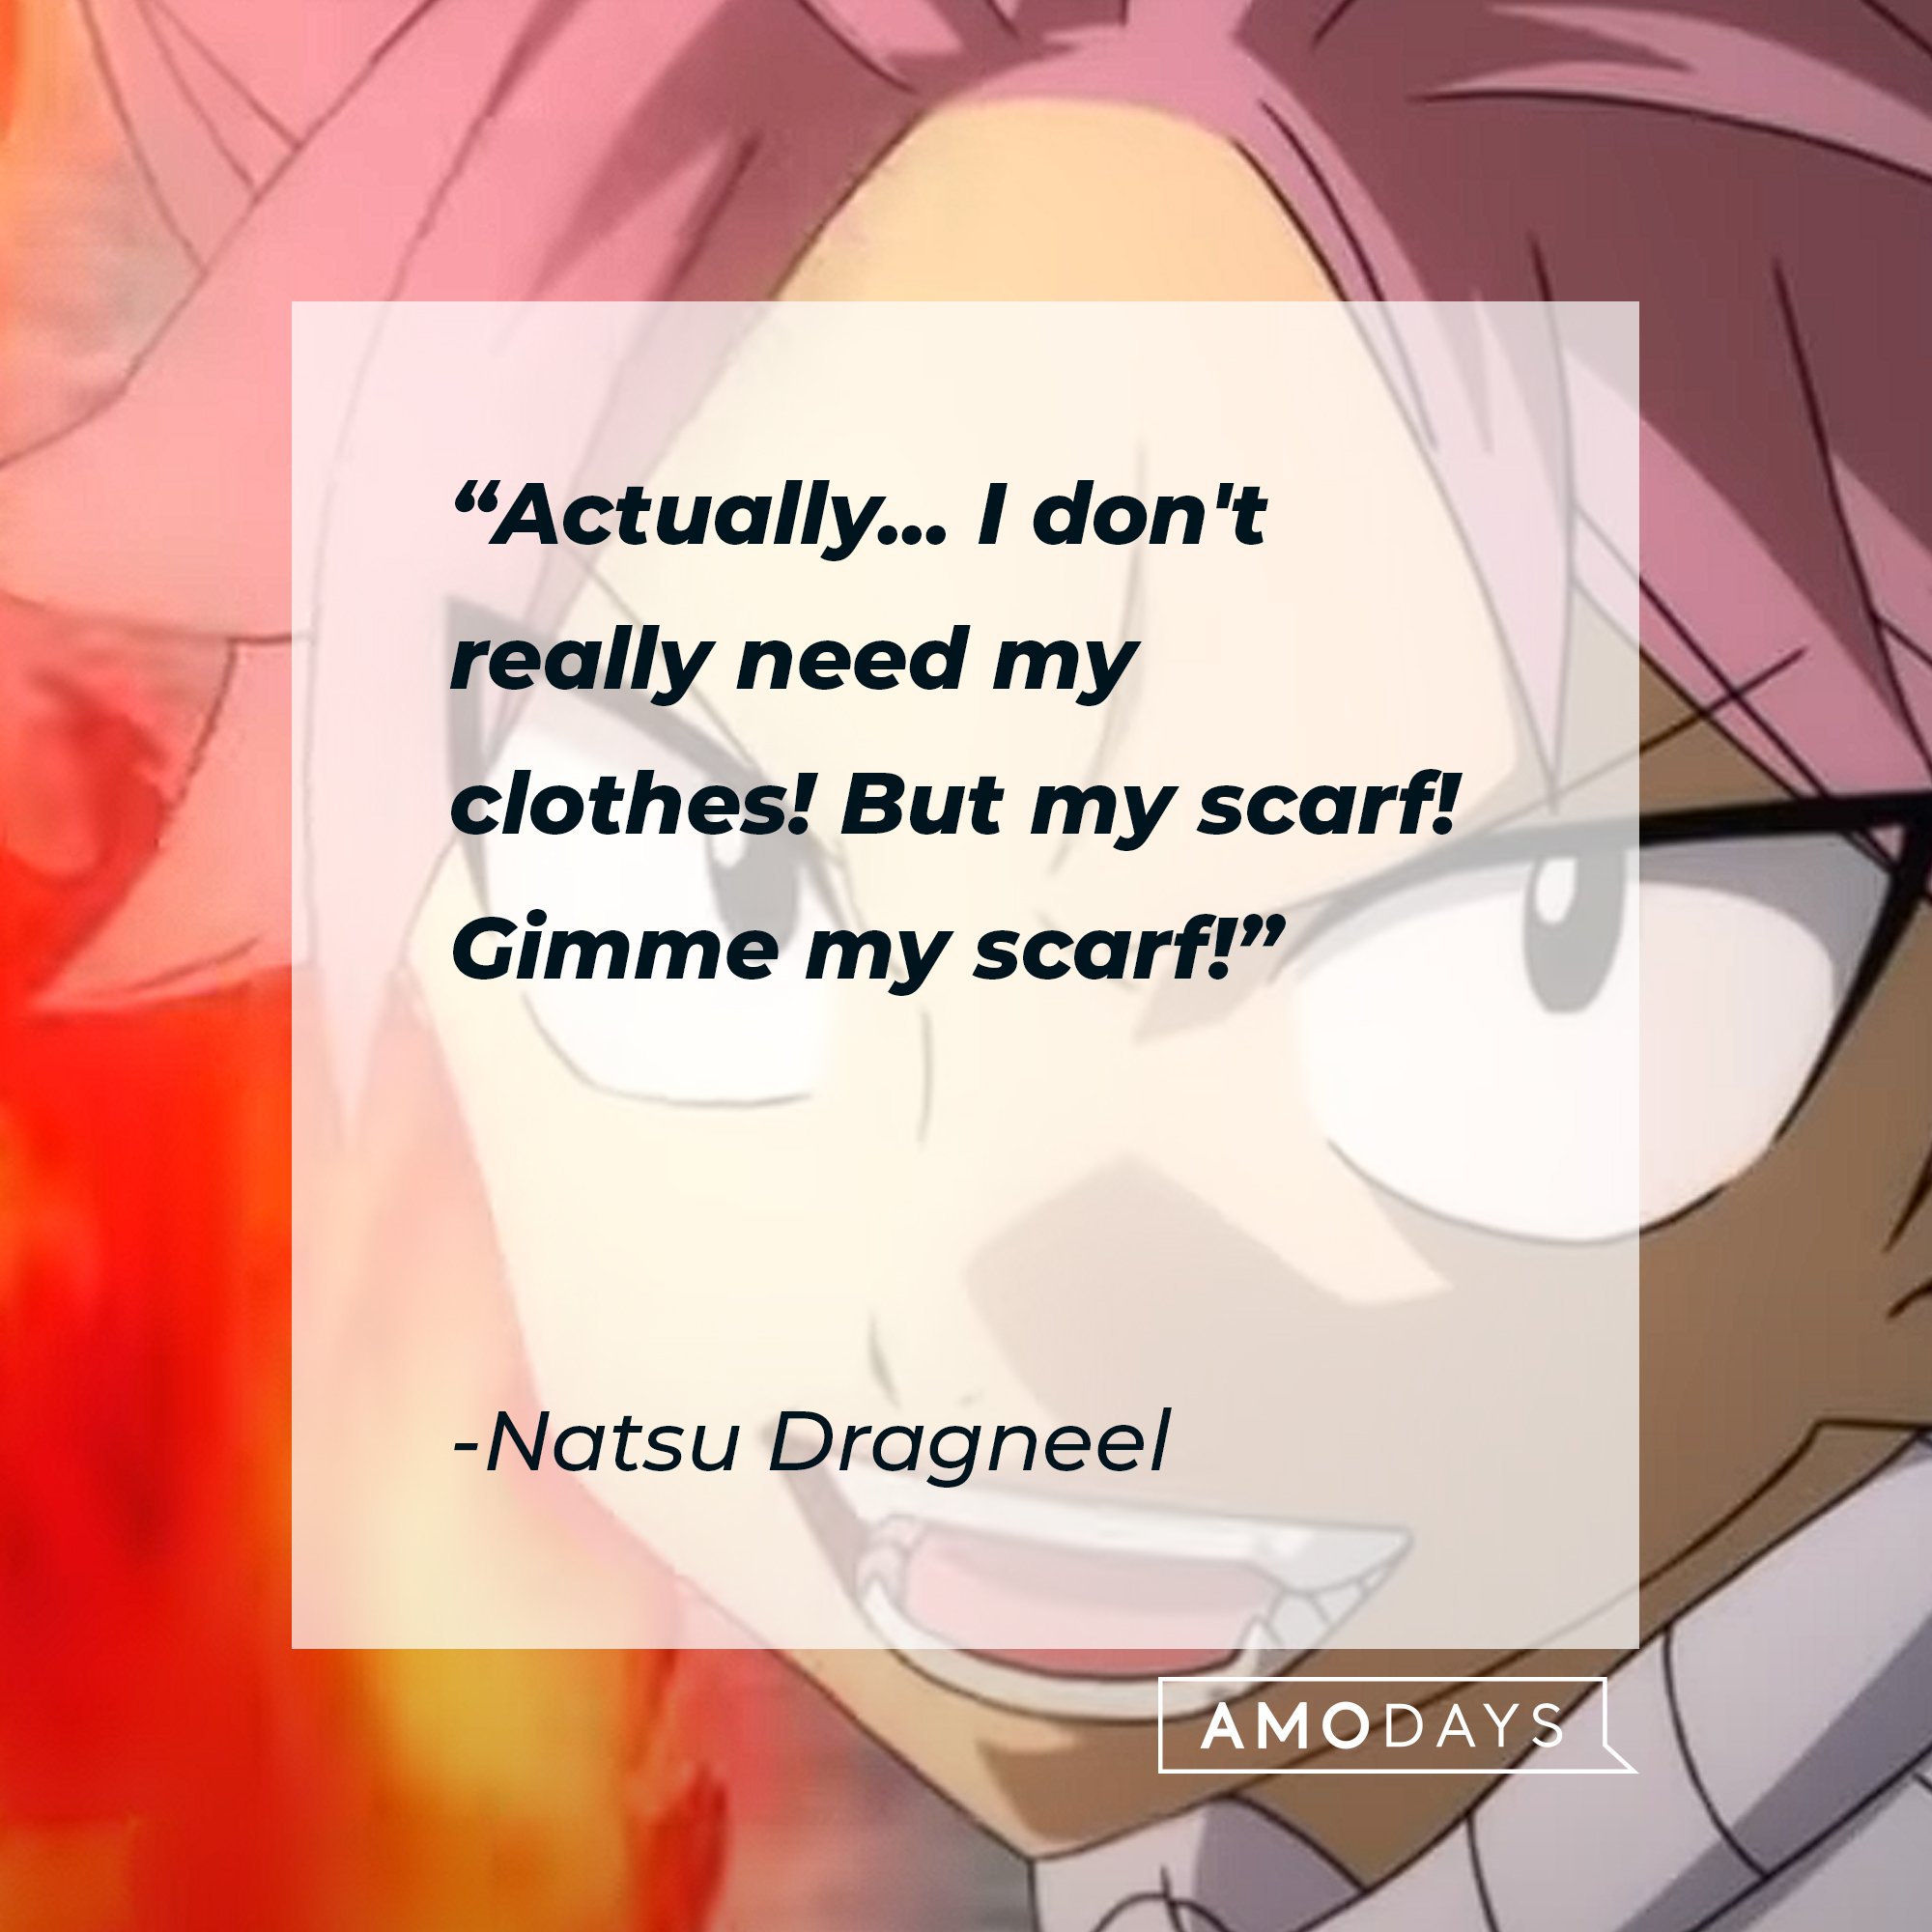   Natsu Dragneel’s quote: “Actually... I don't really need my clothes! But my scarf! Gimme my scarf!" | Image: AmoDays